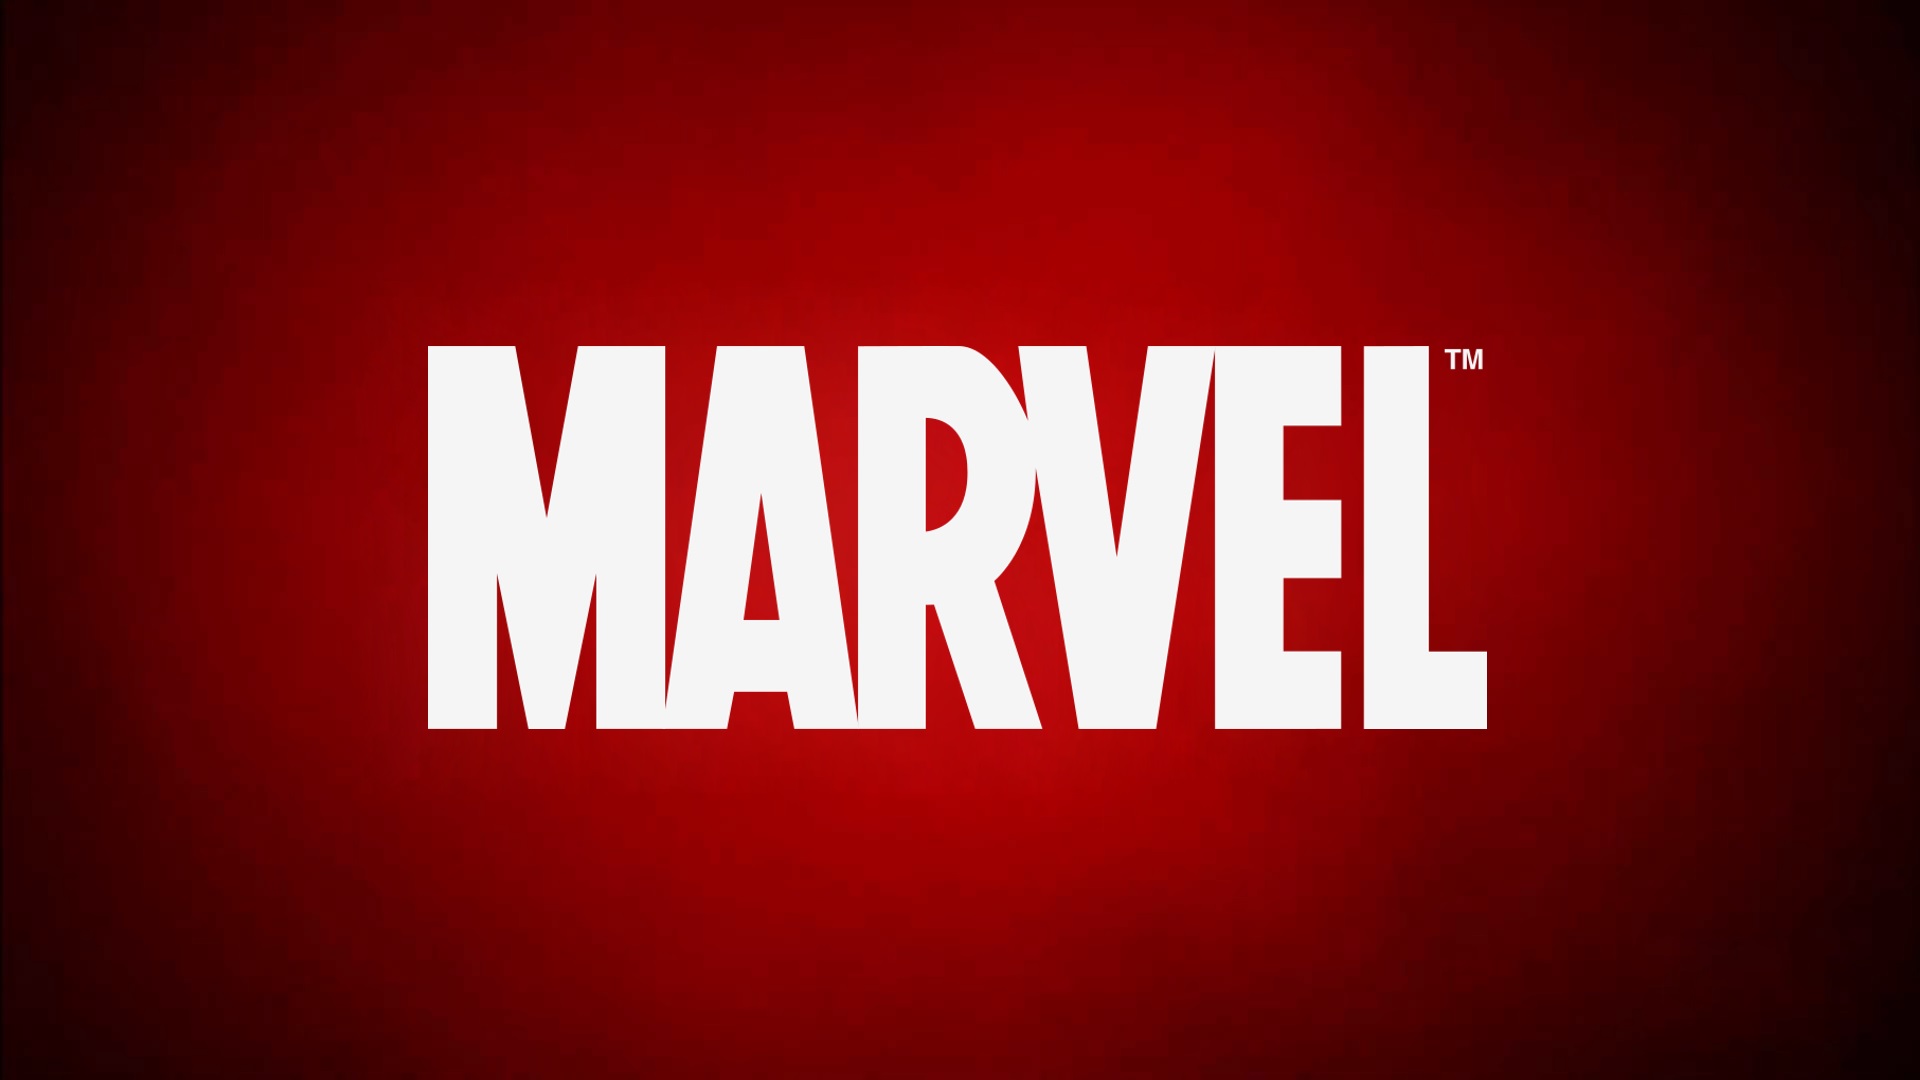 Marvel turned 80 : 5 ‘Super’ facts we bet you didn’t know about Marvel